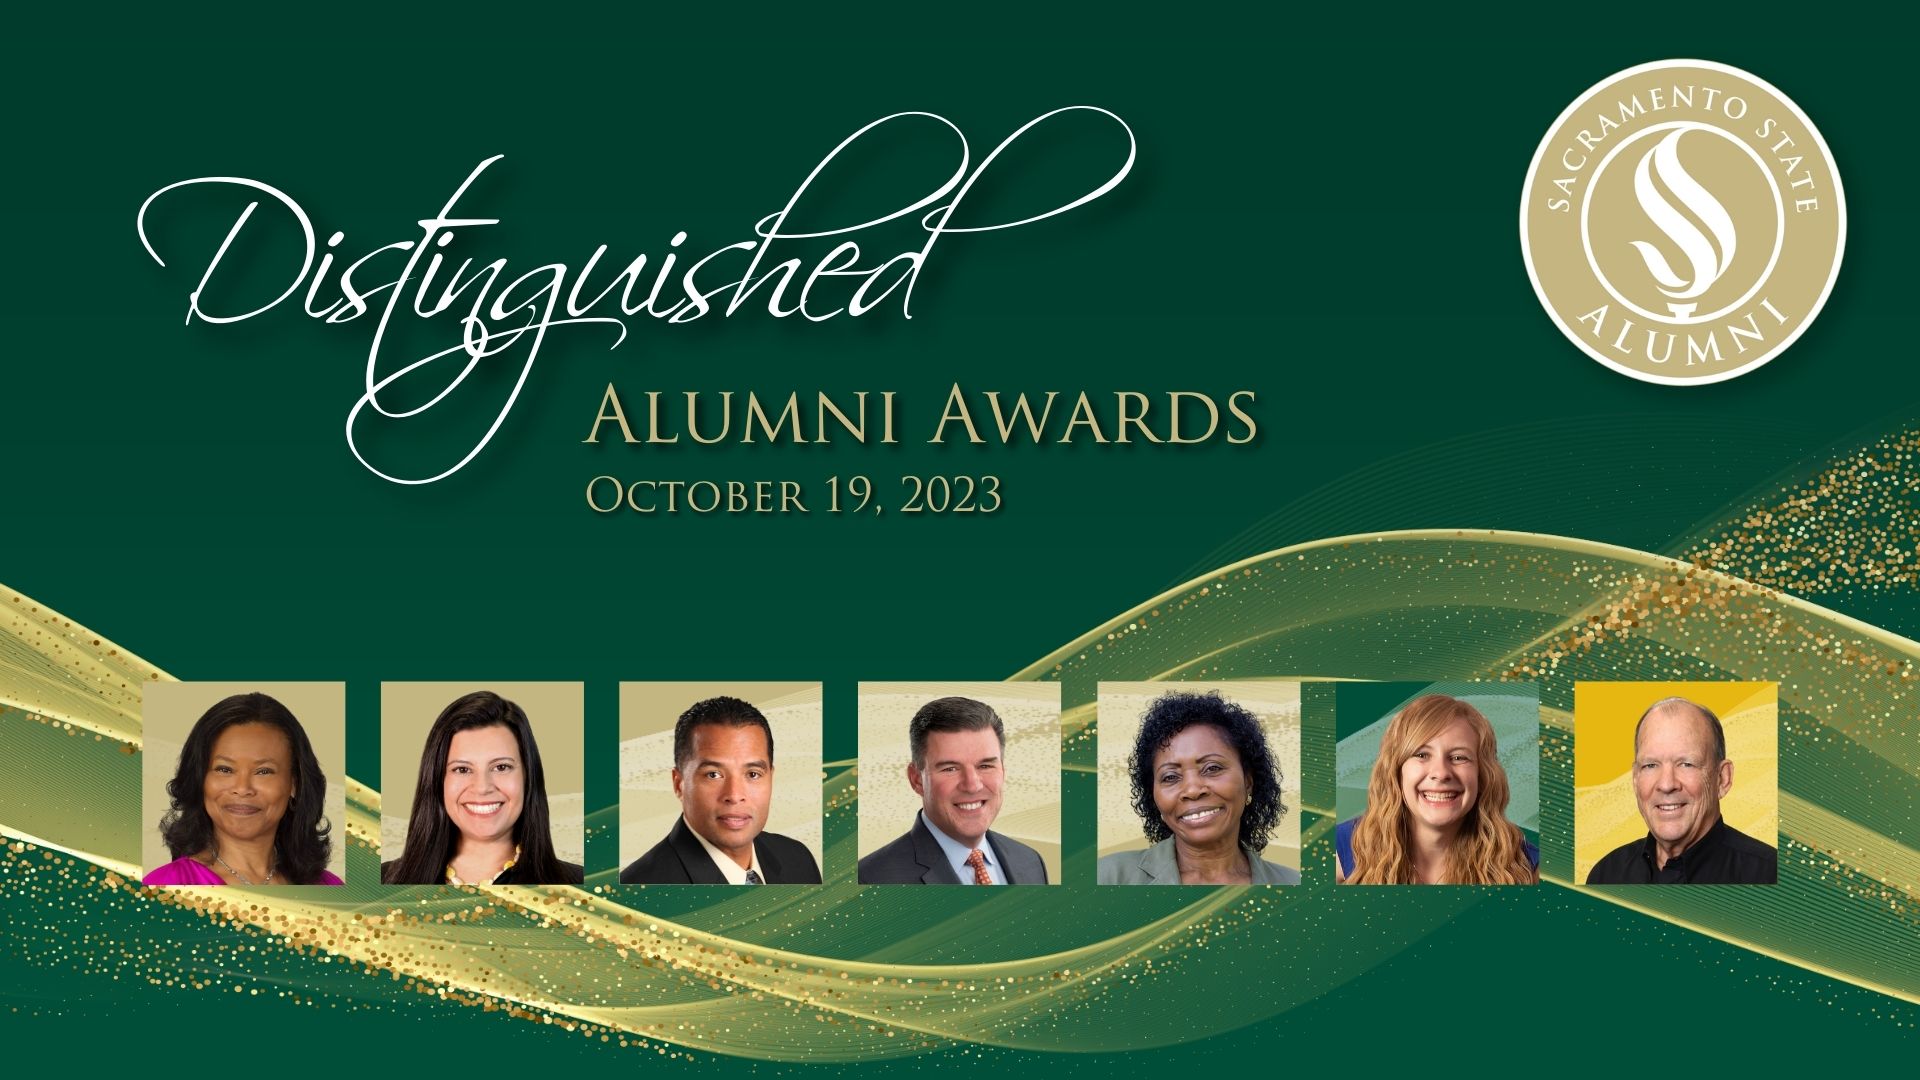 A graphic depicting the 2023 Distinguished Alumni Award winners on a green and gold background with thumbnail images of each recipient.